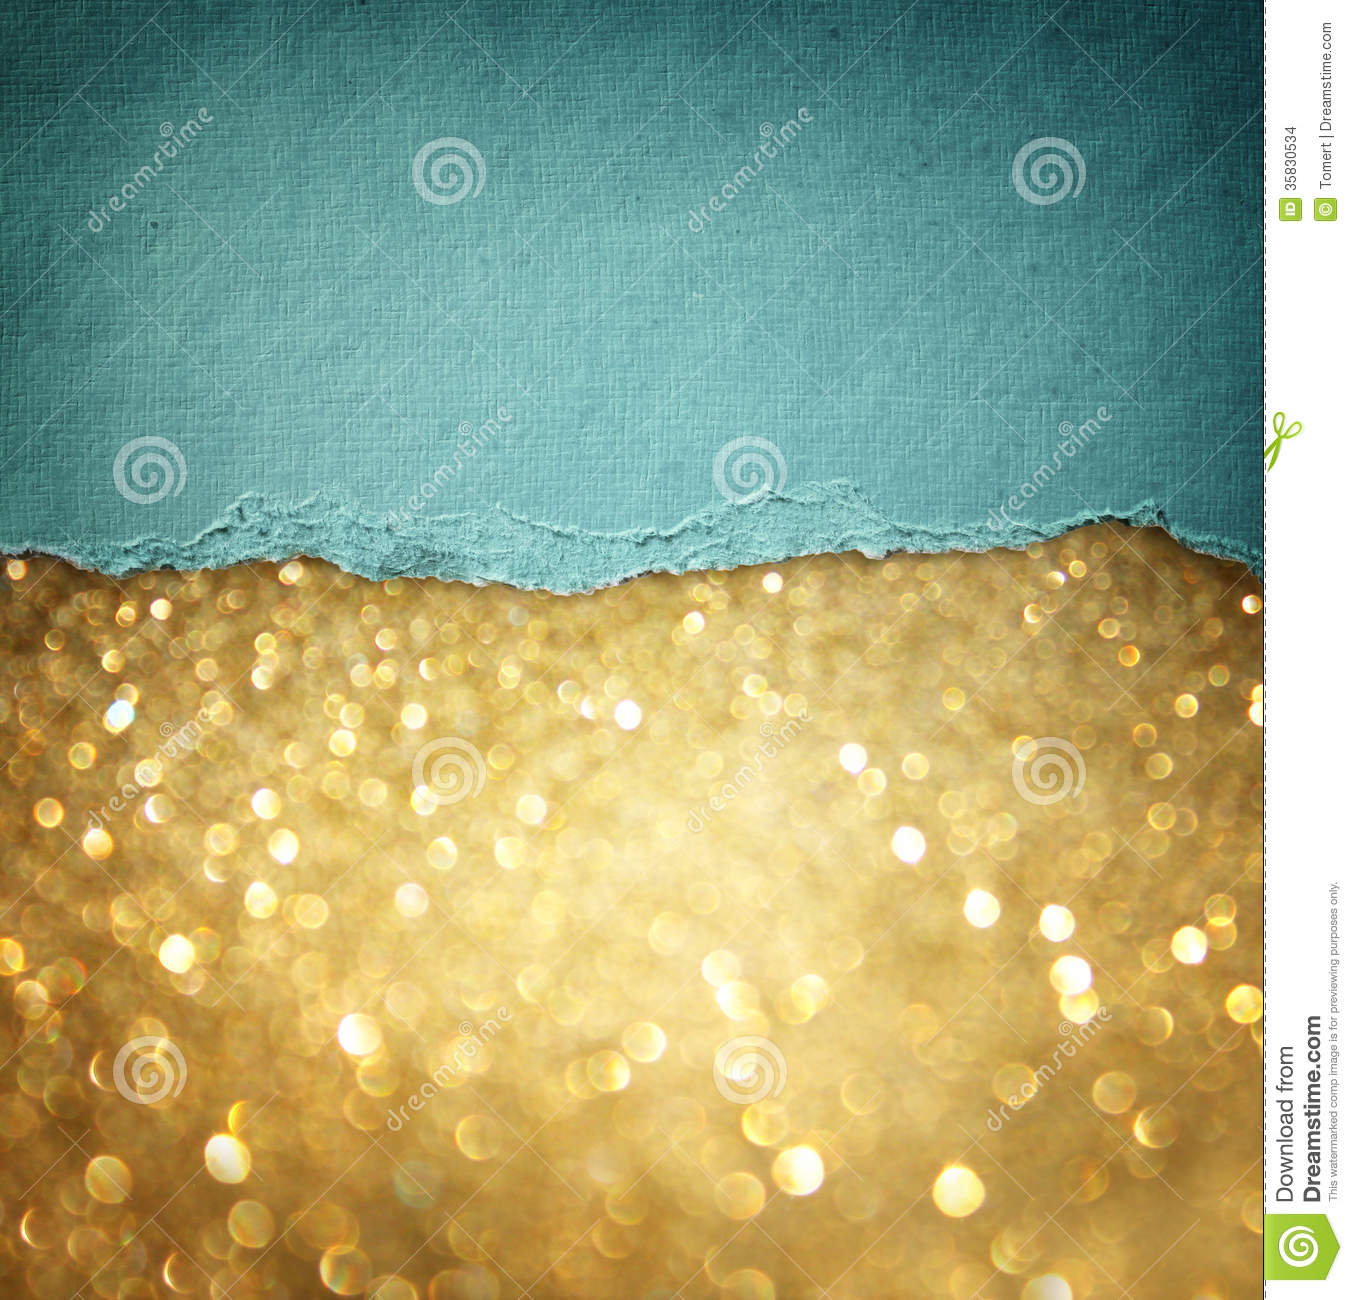 Teal And Gold Backgrounds